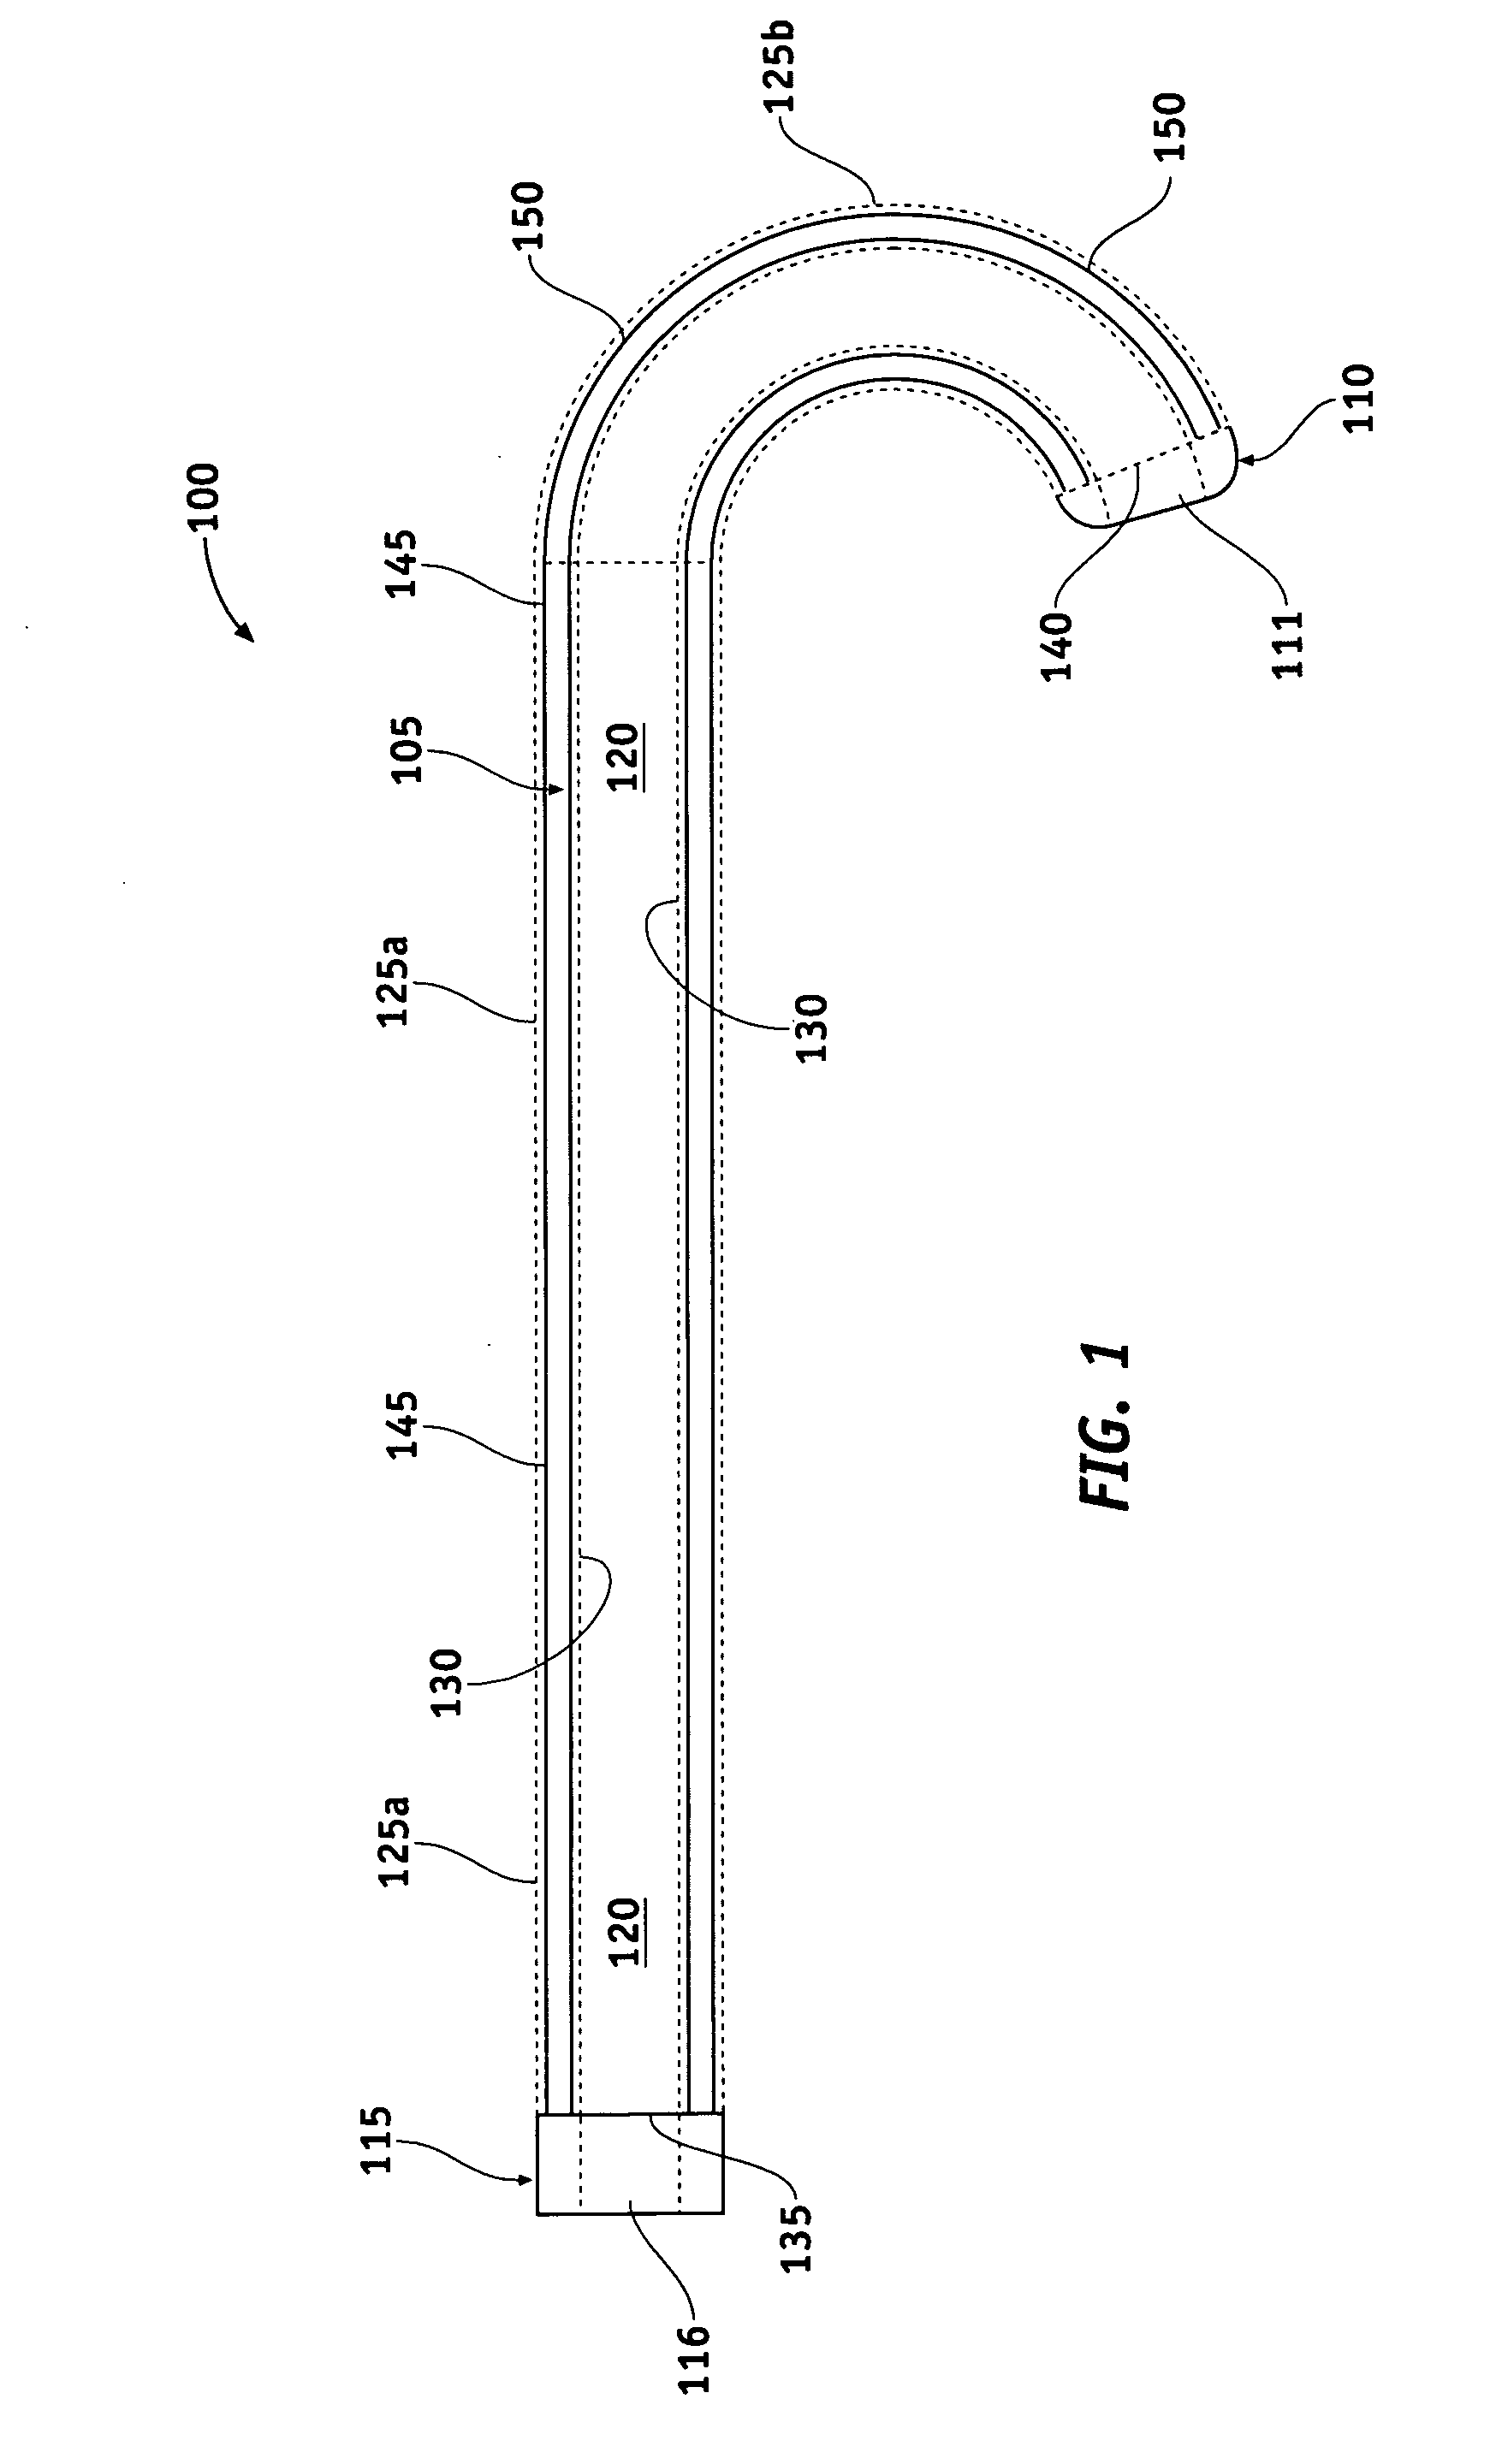 Curved catheter comprising a solid-walled metal tube with varying stiffness